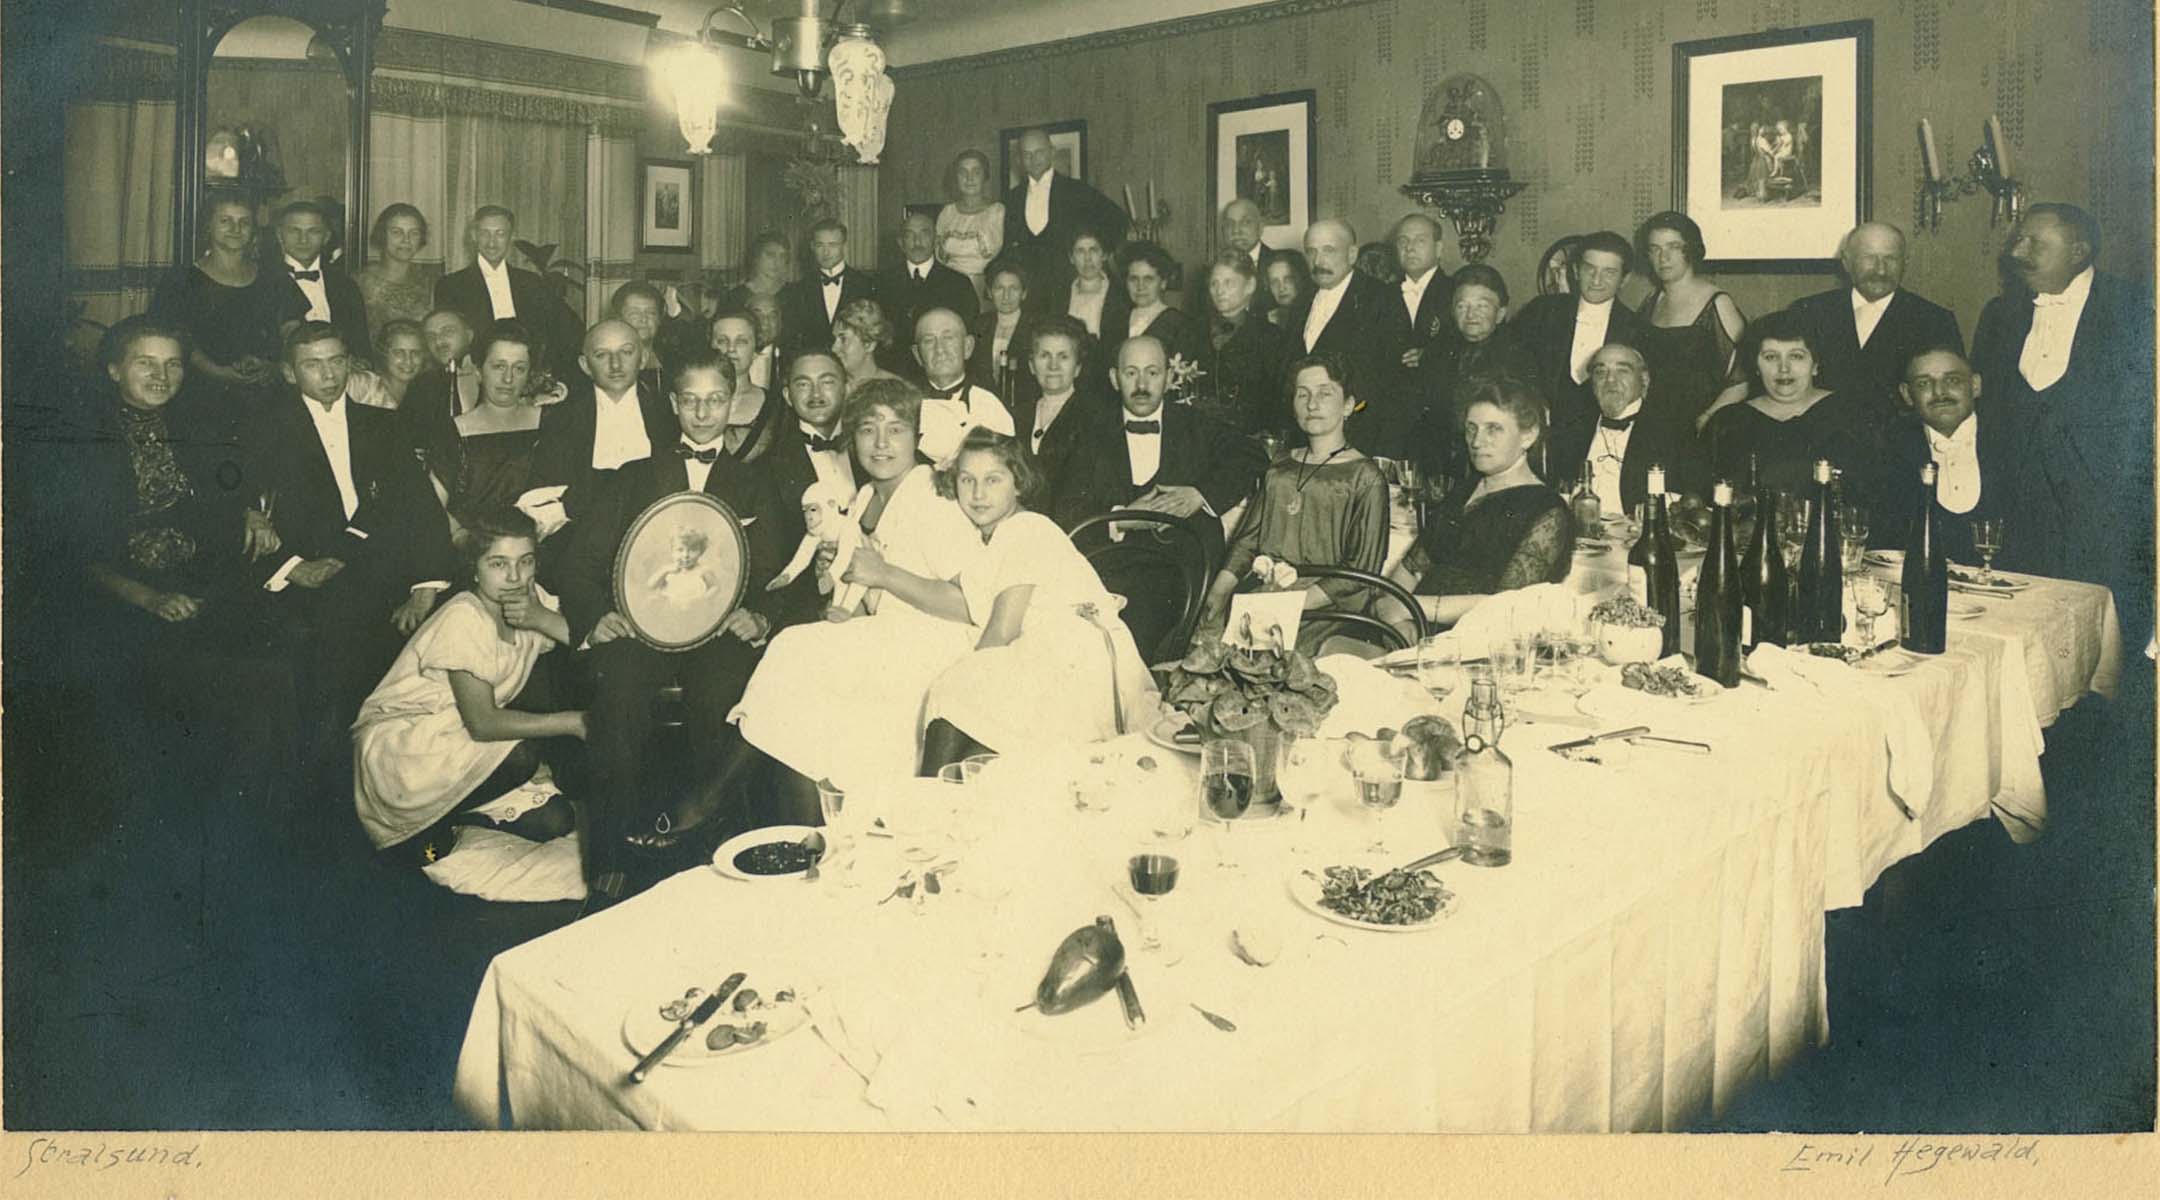 The golden wedding of Selma and Julius Blach, held in Stralsund, Germany in 1921. The Jewish family would be torn asunder by the Nazi Holocaust. (Courtesy of Fechner)